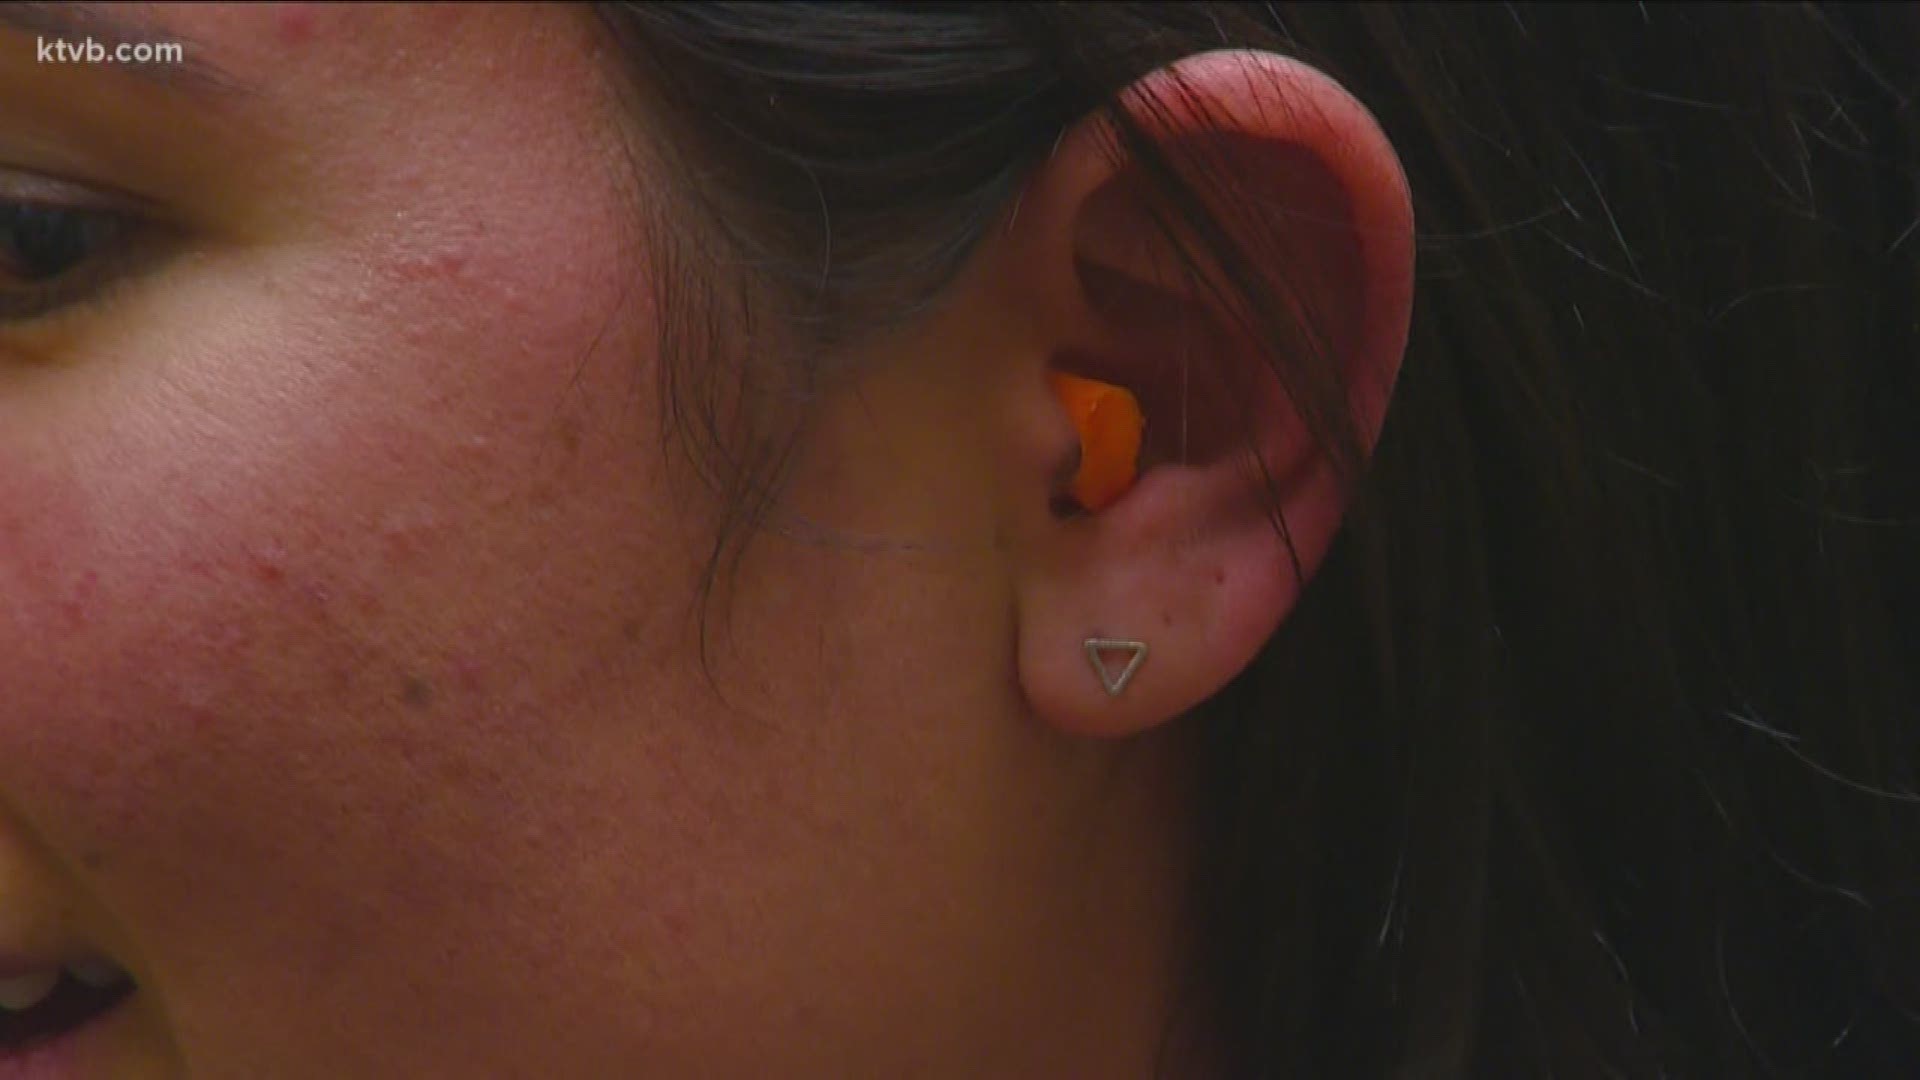 During Treefort 2019's opening day, St. Luke's helped festival-goers avoid permanent damage to their hearing.